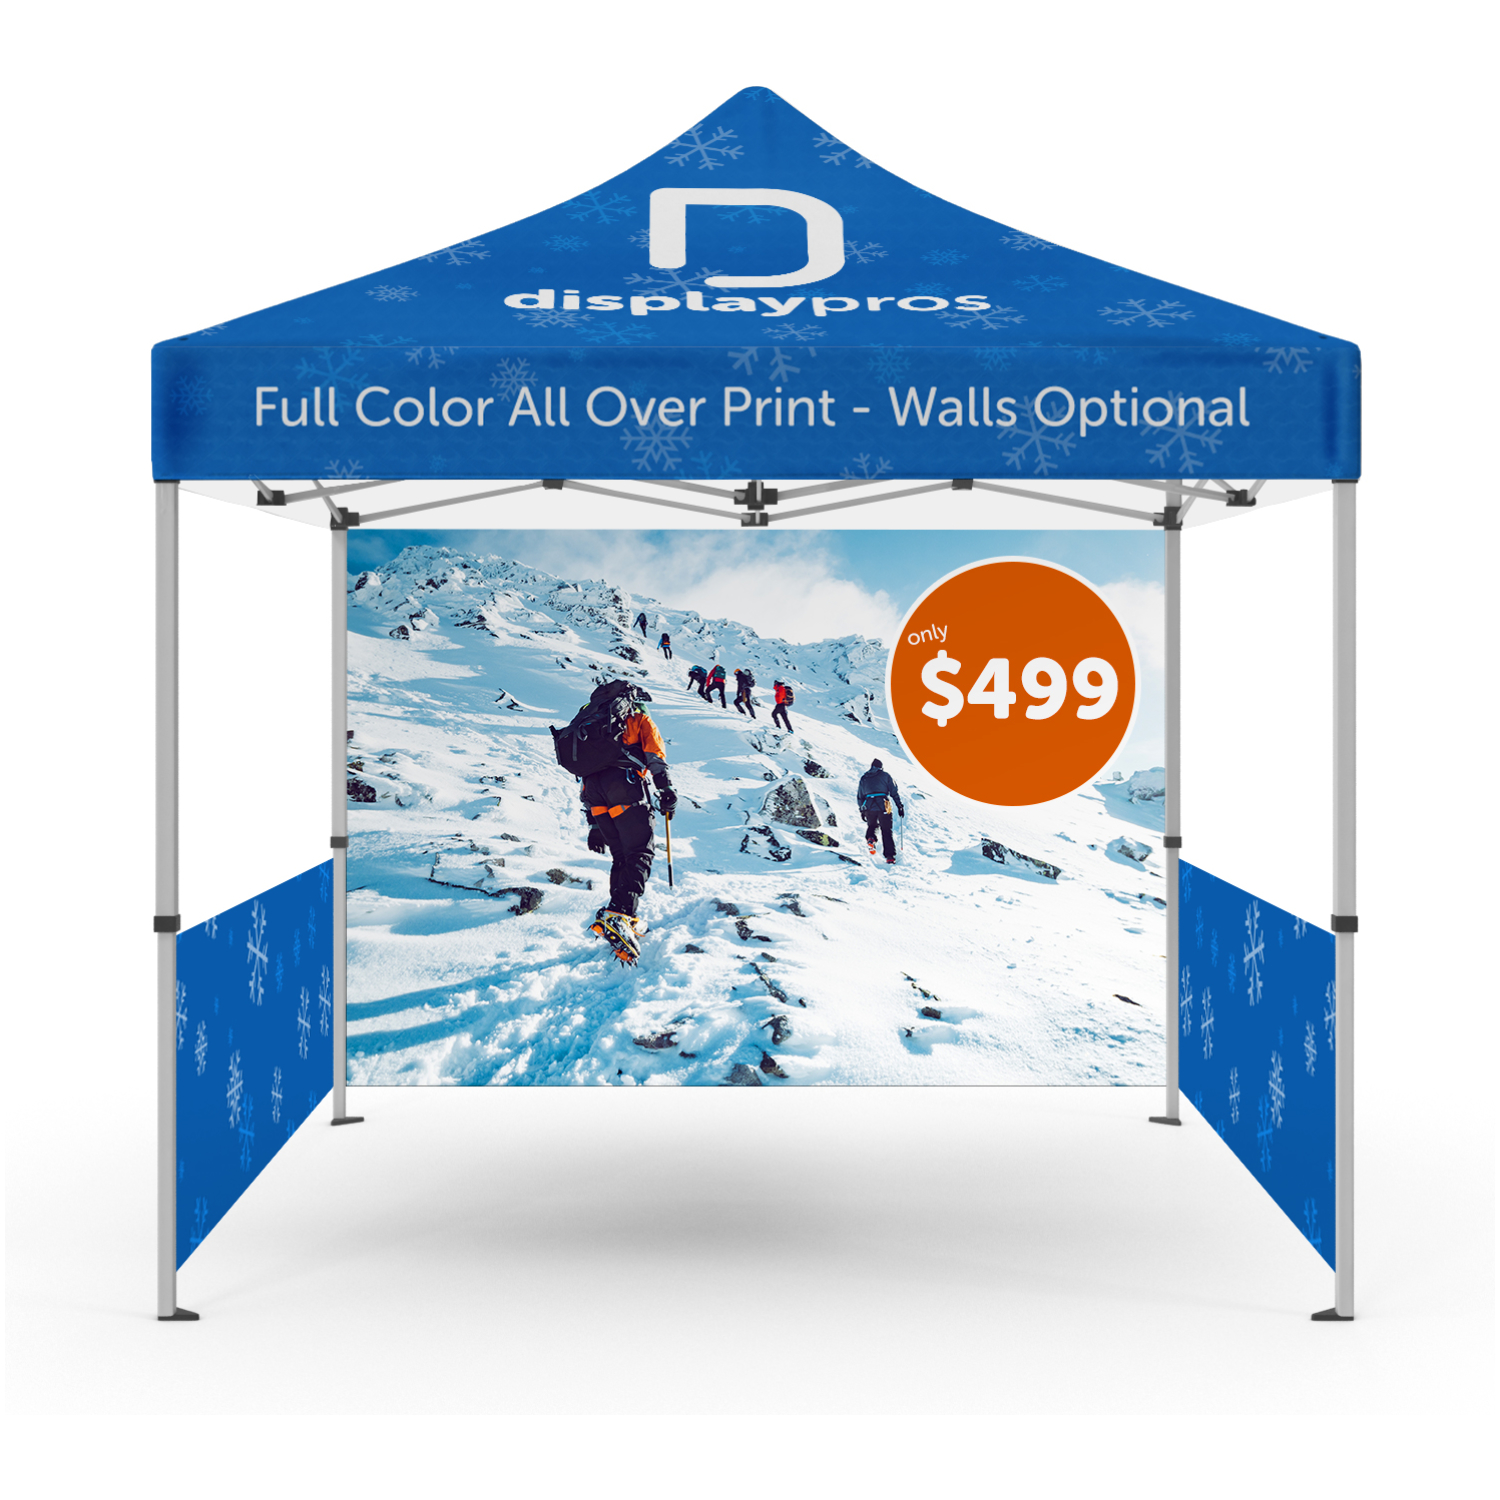 Best Photo Lightboxes 2021 Reviews: Portable Pop-Up Photography Tent